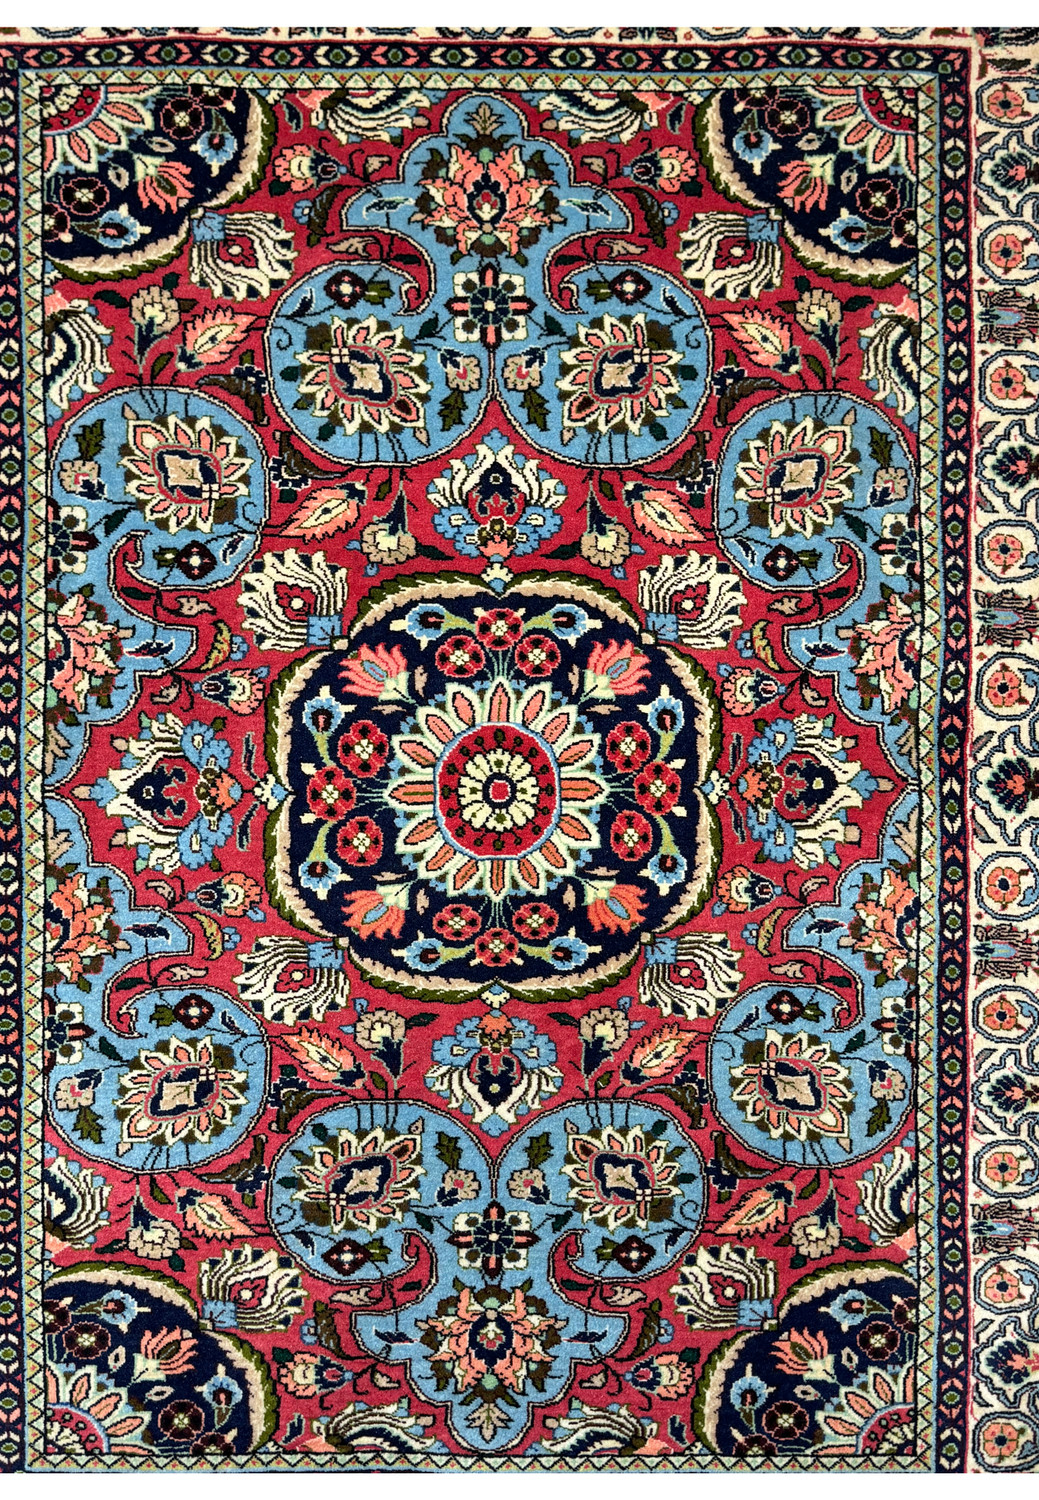 Close-up view of a Persian Bijar rug's central medallion in cerulean blue and red with detailed patterns, showcasing the high-density knotting technique of traditional Persian rug-making